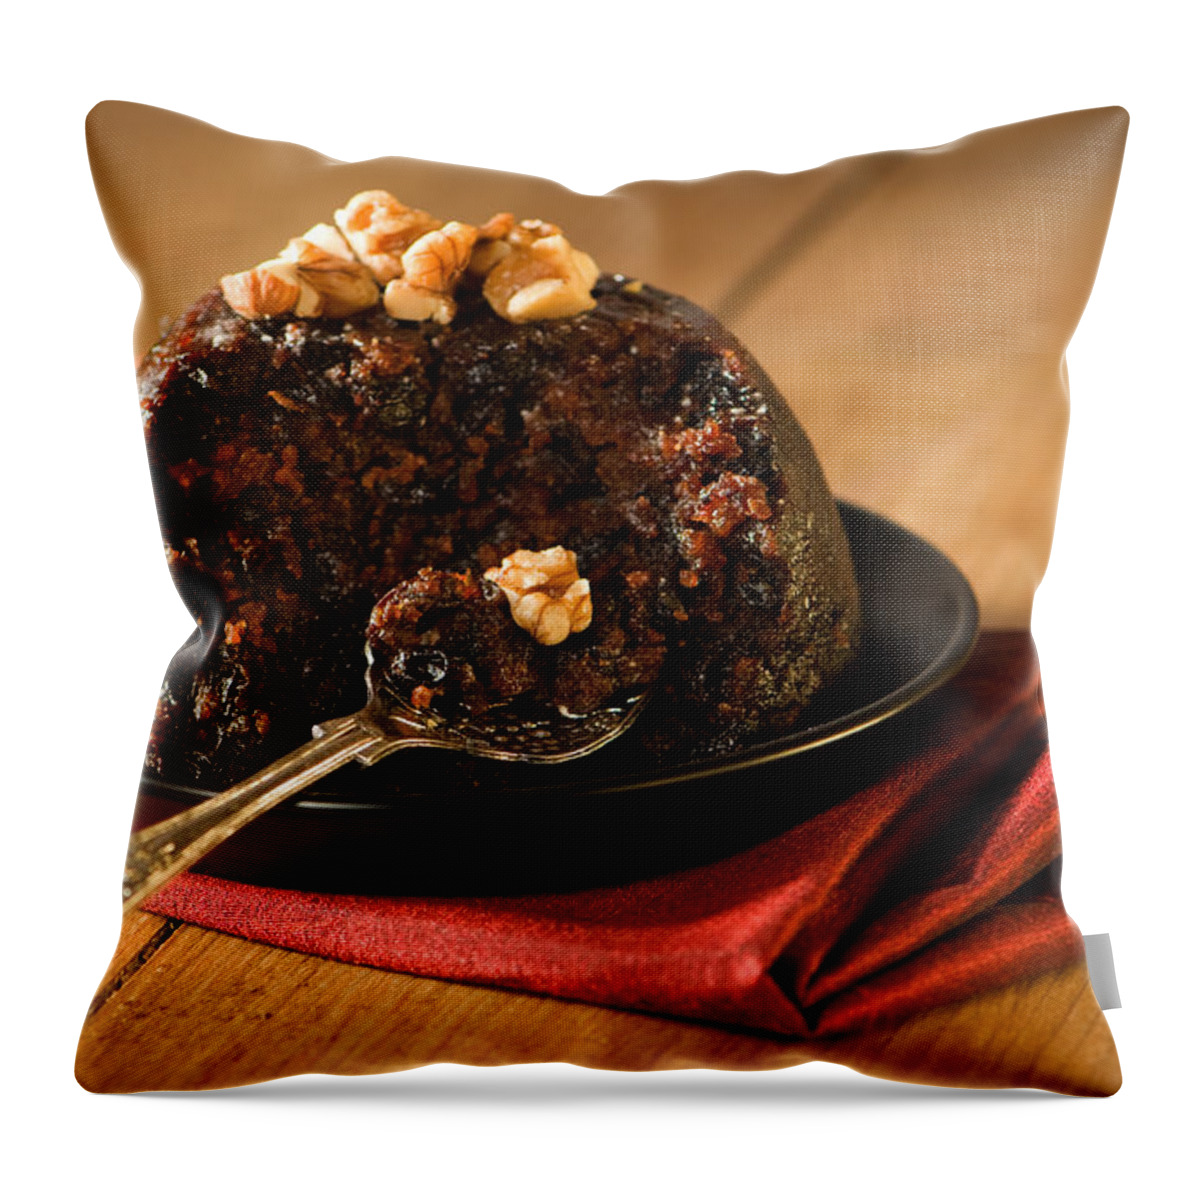 Christmas Throw Pillow featuring the photograph Spoonful Of Christmas Pudding by Amanda Elwell